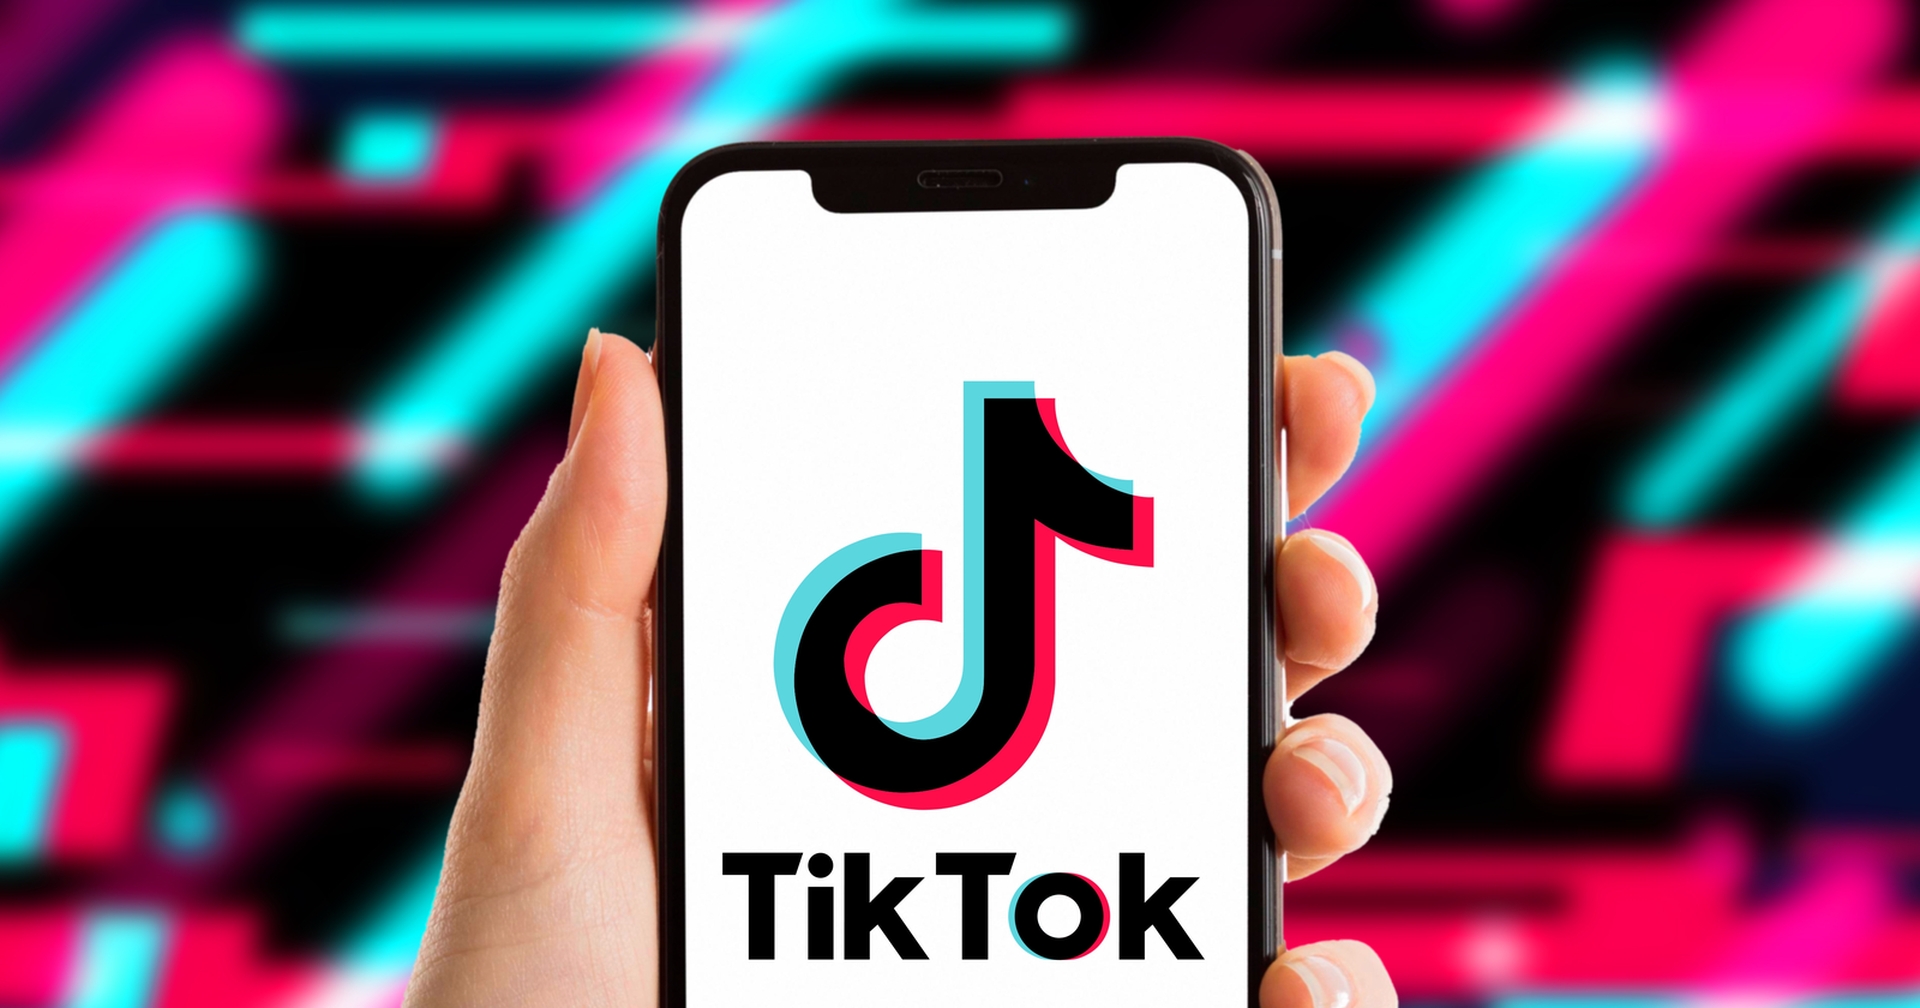 Today, we are going to be covering can you see TikTok live viewers, and some other commonly asked questions such as "Can someone see you watching their live... 